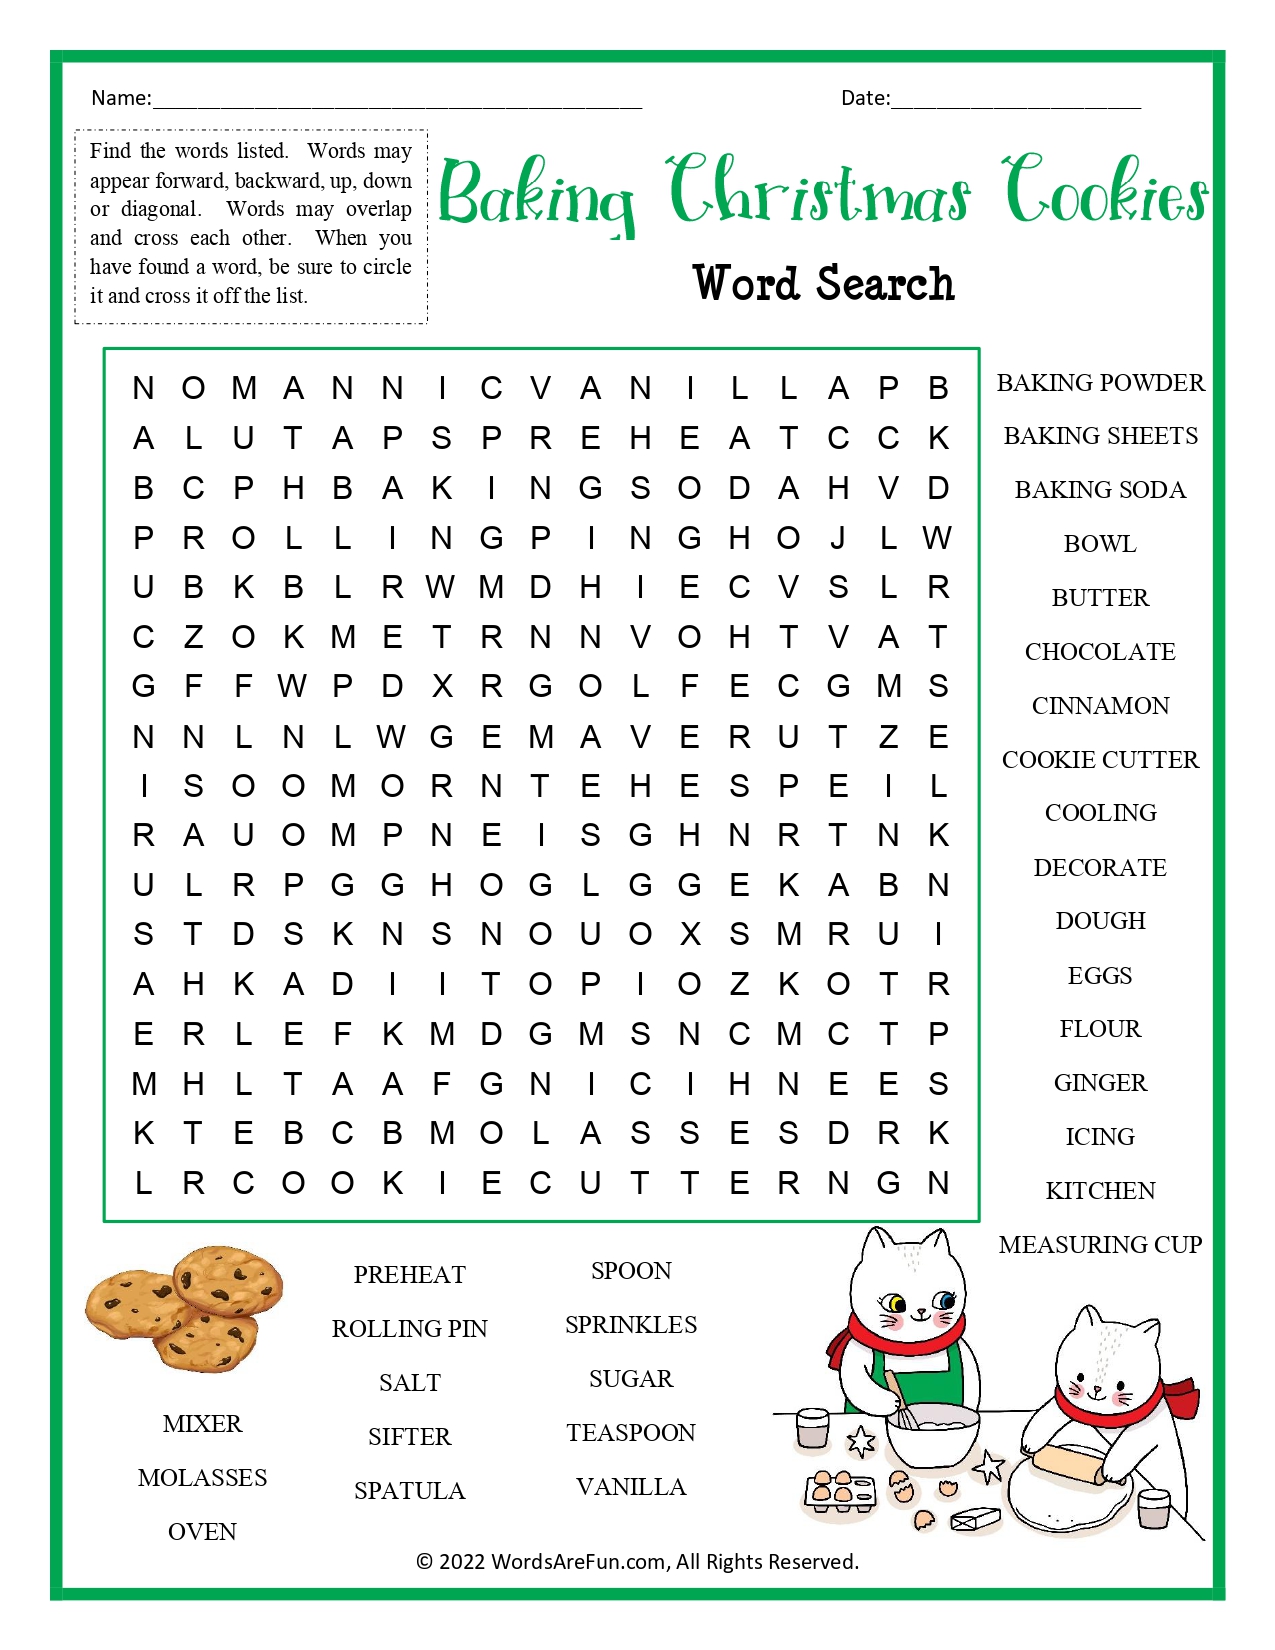 Baking Christmas Cookies Word Search